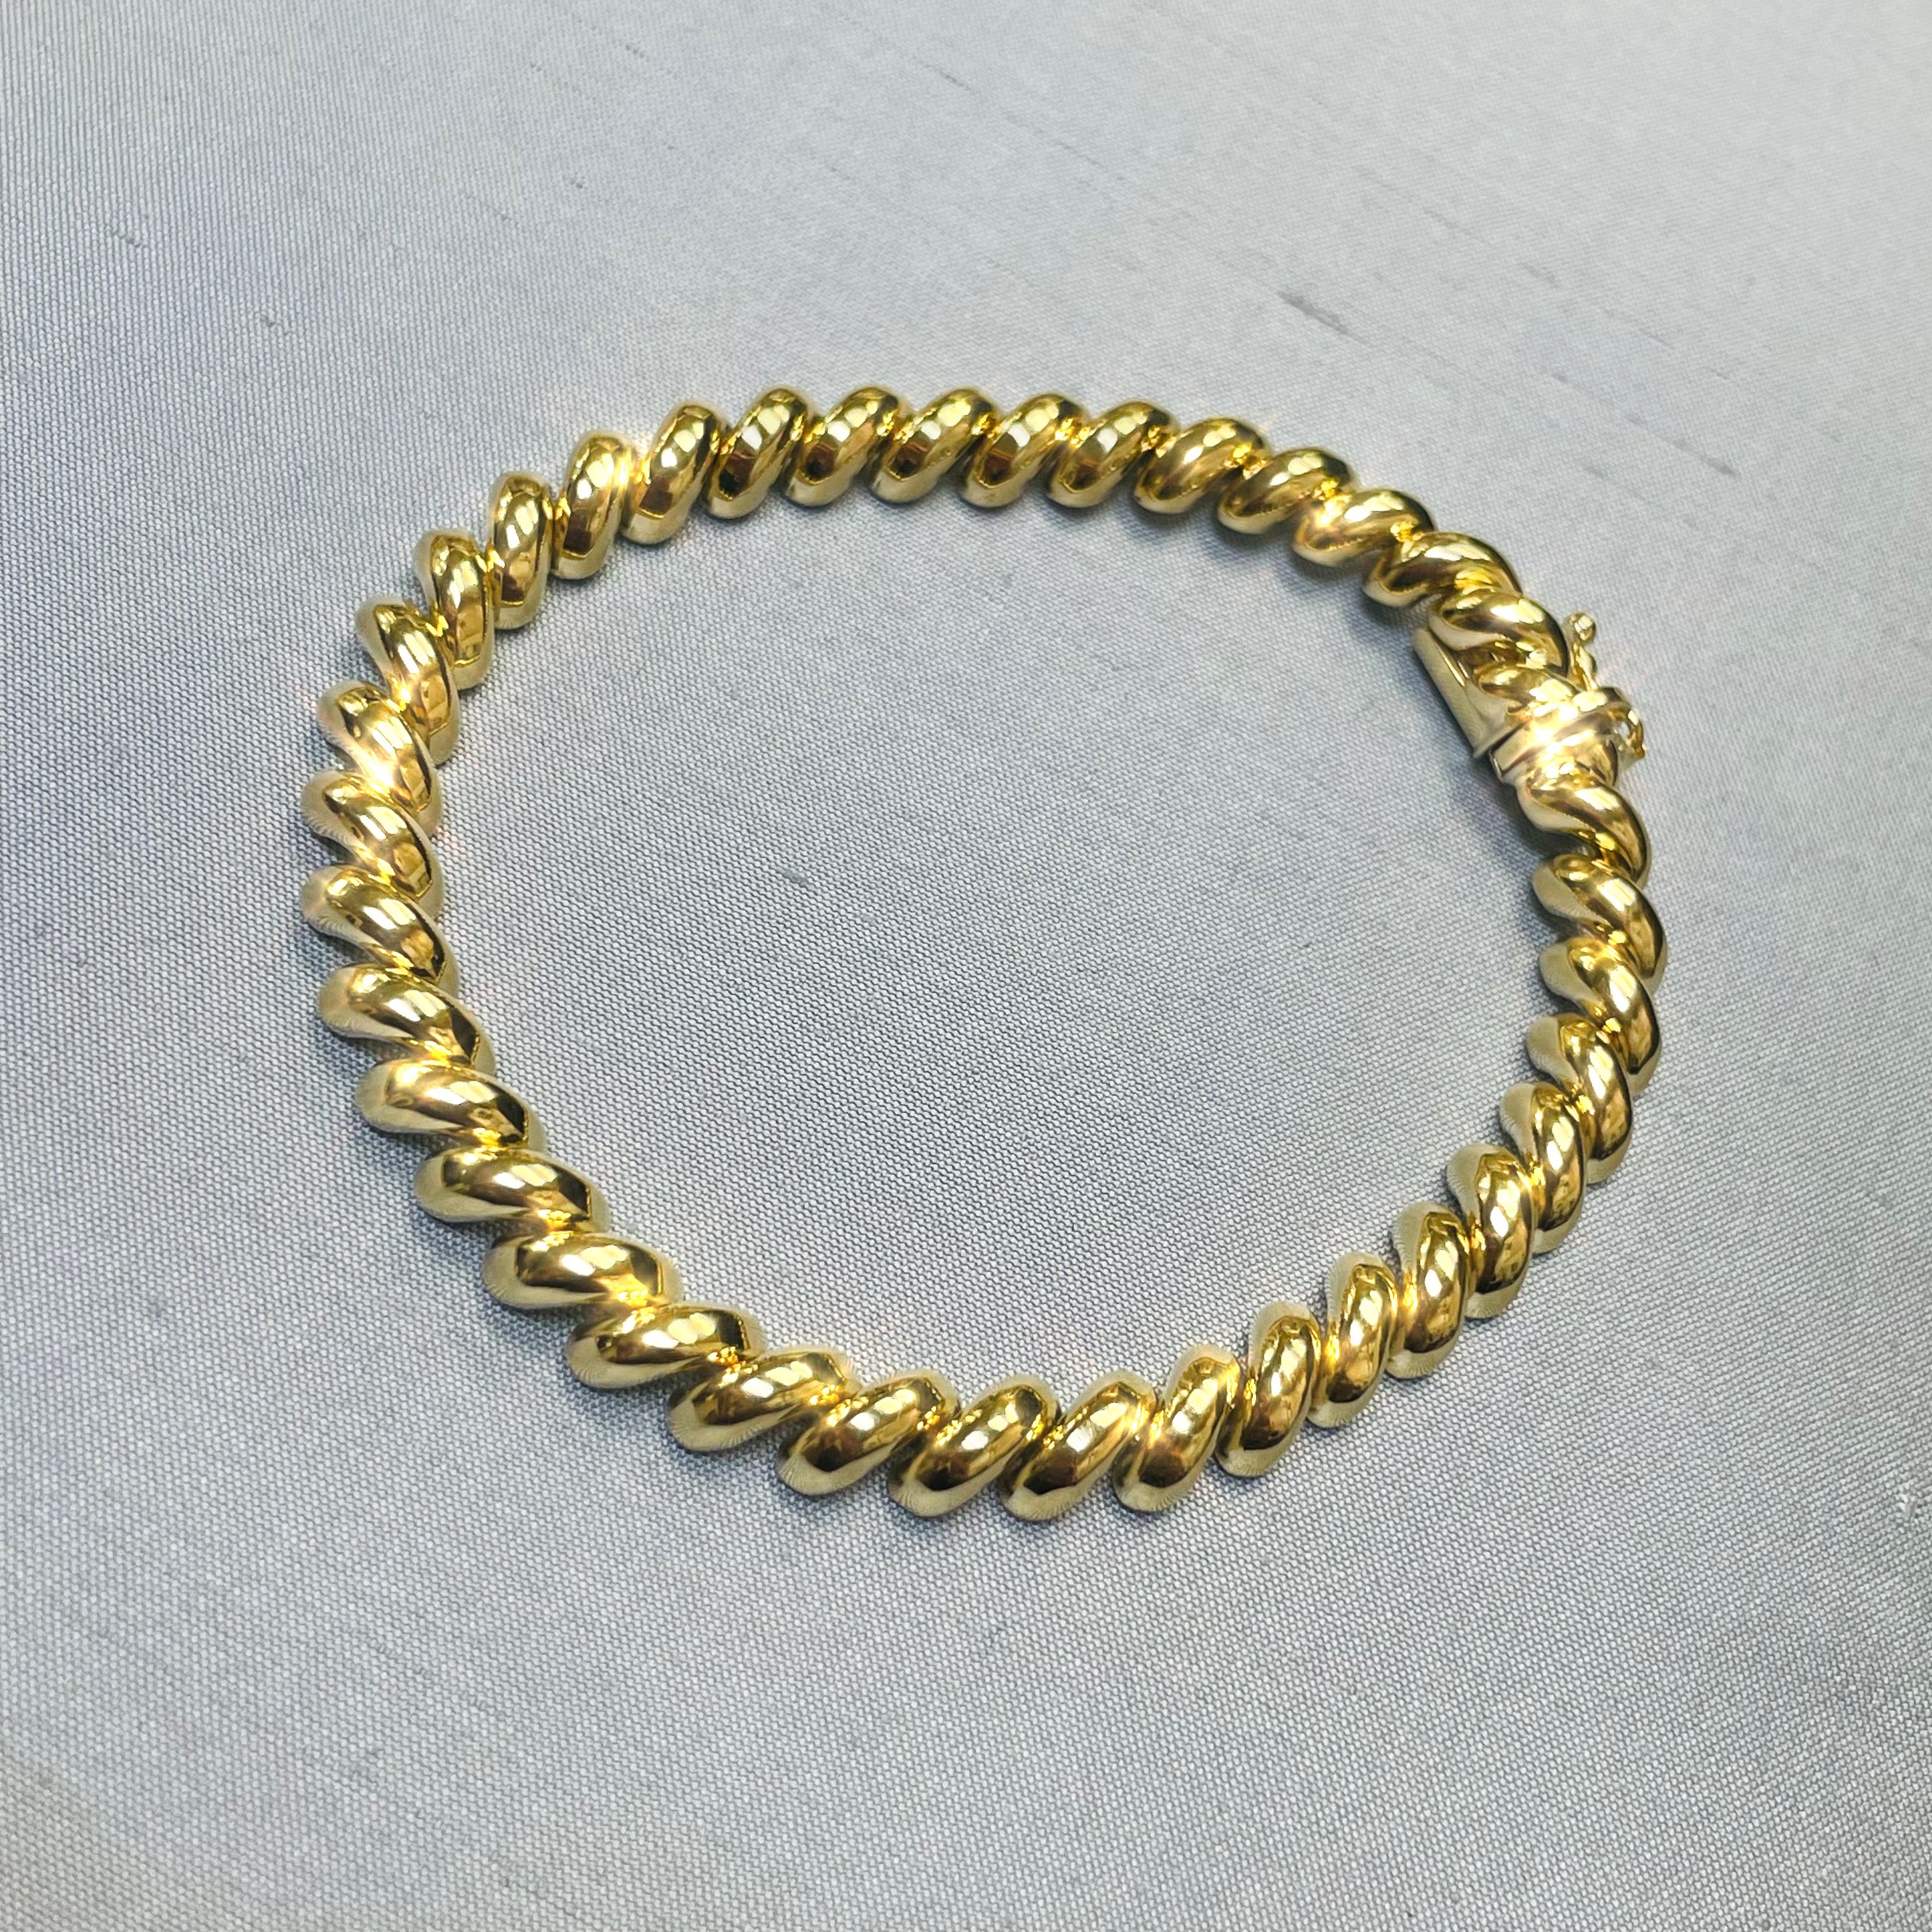 7” 7mm Macaroni San Marco Link Bracelet in Solid 14K Yellow Gold